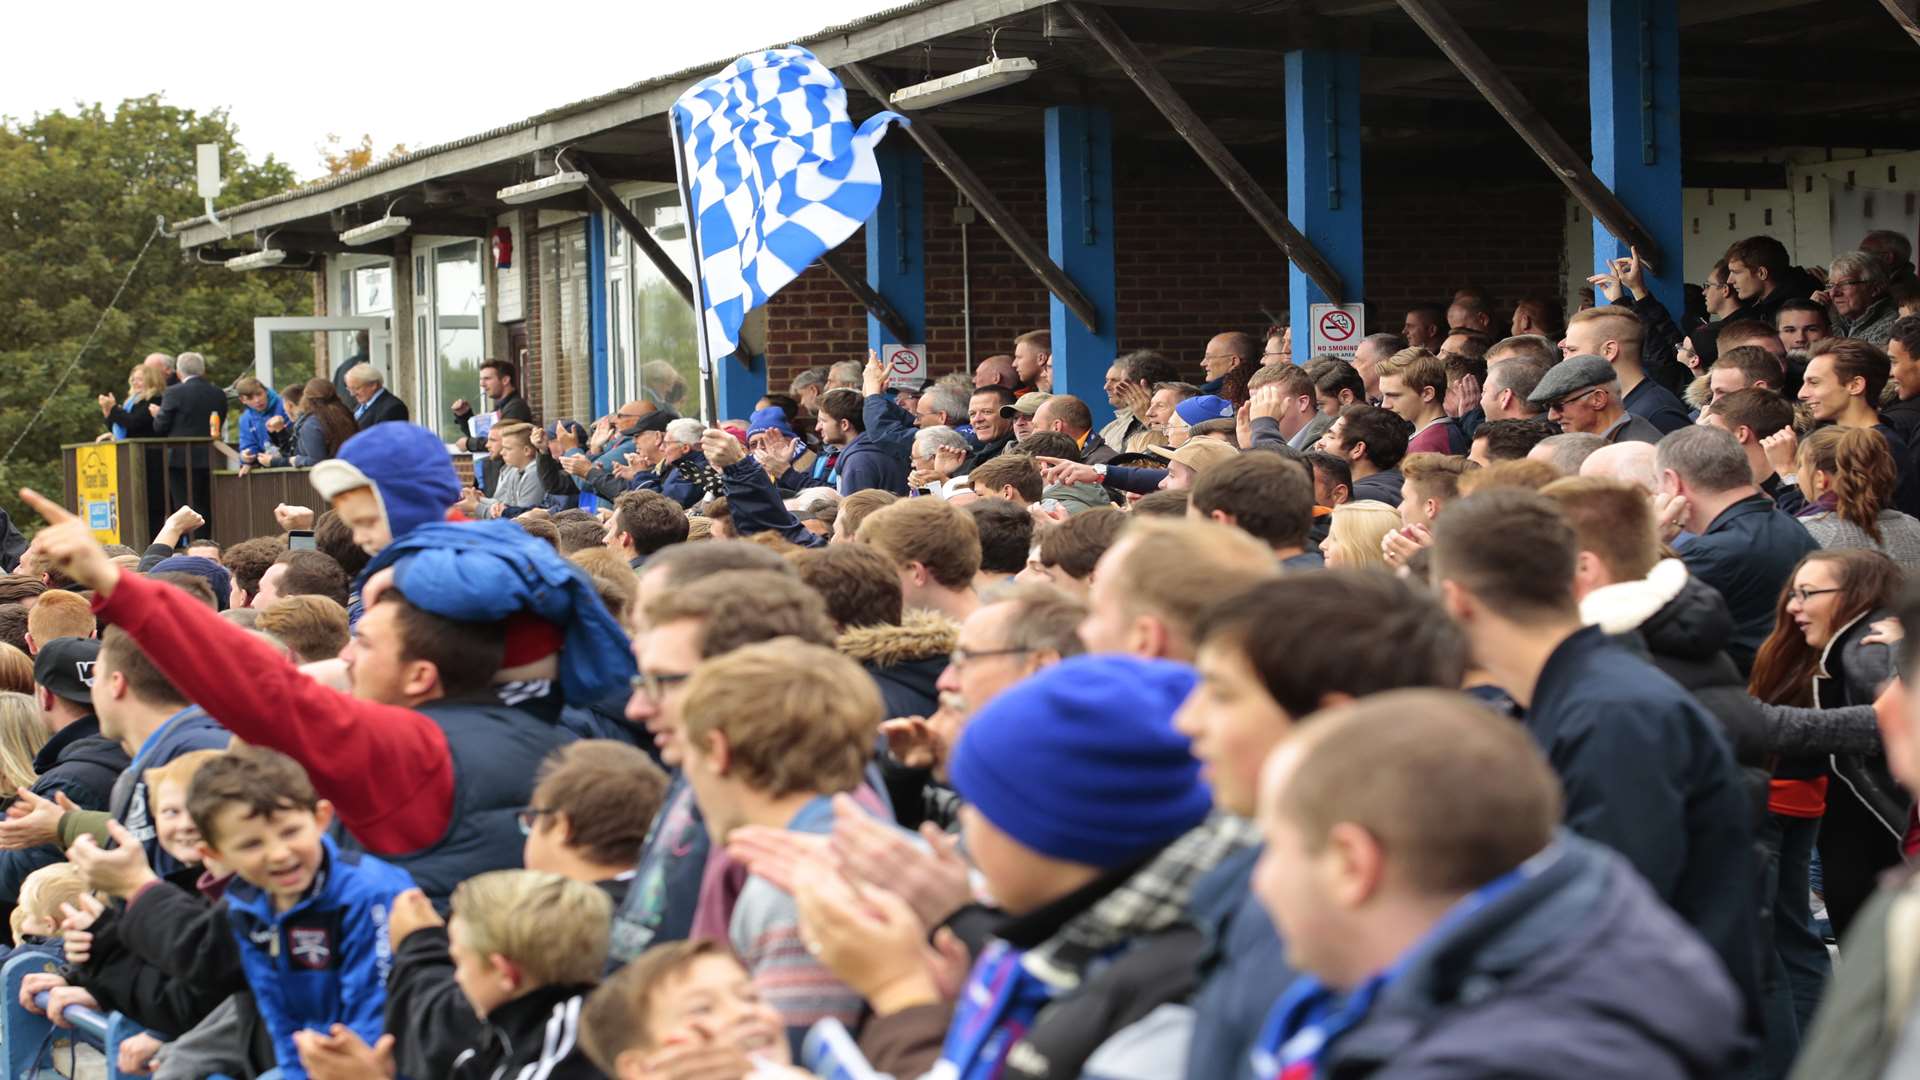 Alistair Bayliss is hoping Margate fans turn out in force for the next two home games Picture: Martin Apps